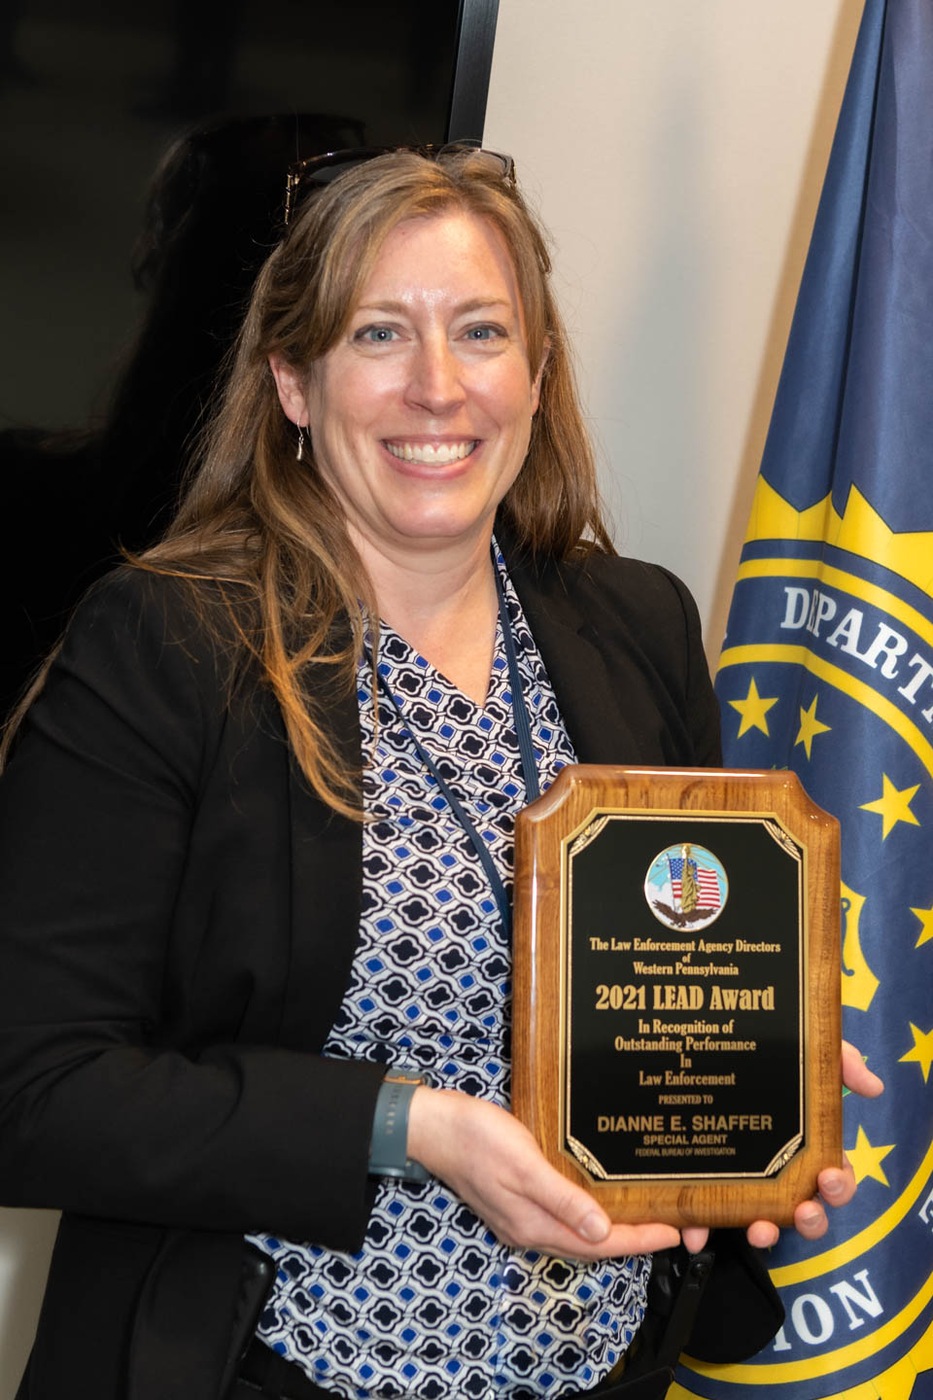 Celebration of 50 years of female special agents in the FBI. Dianne Shaffer from the Pittsburgh Field Office